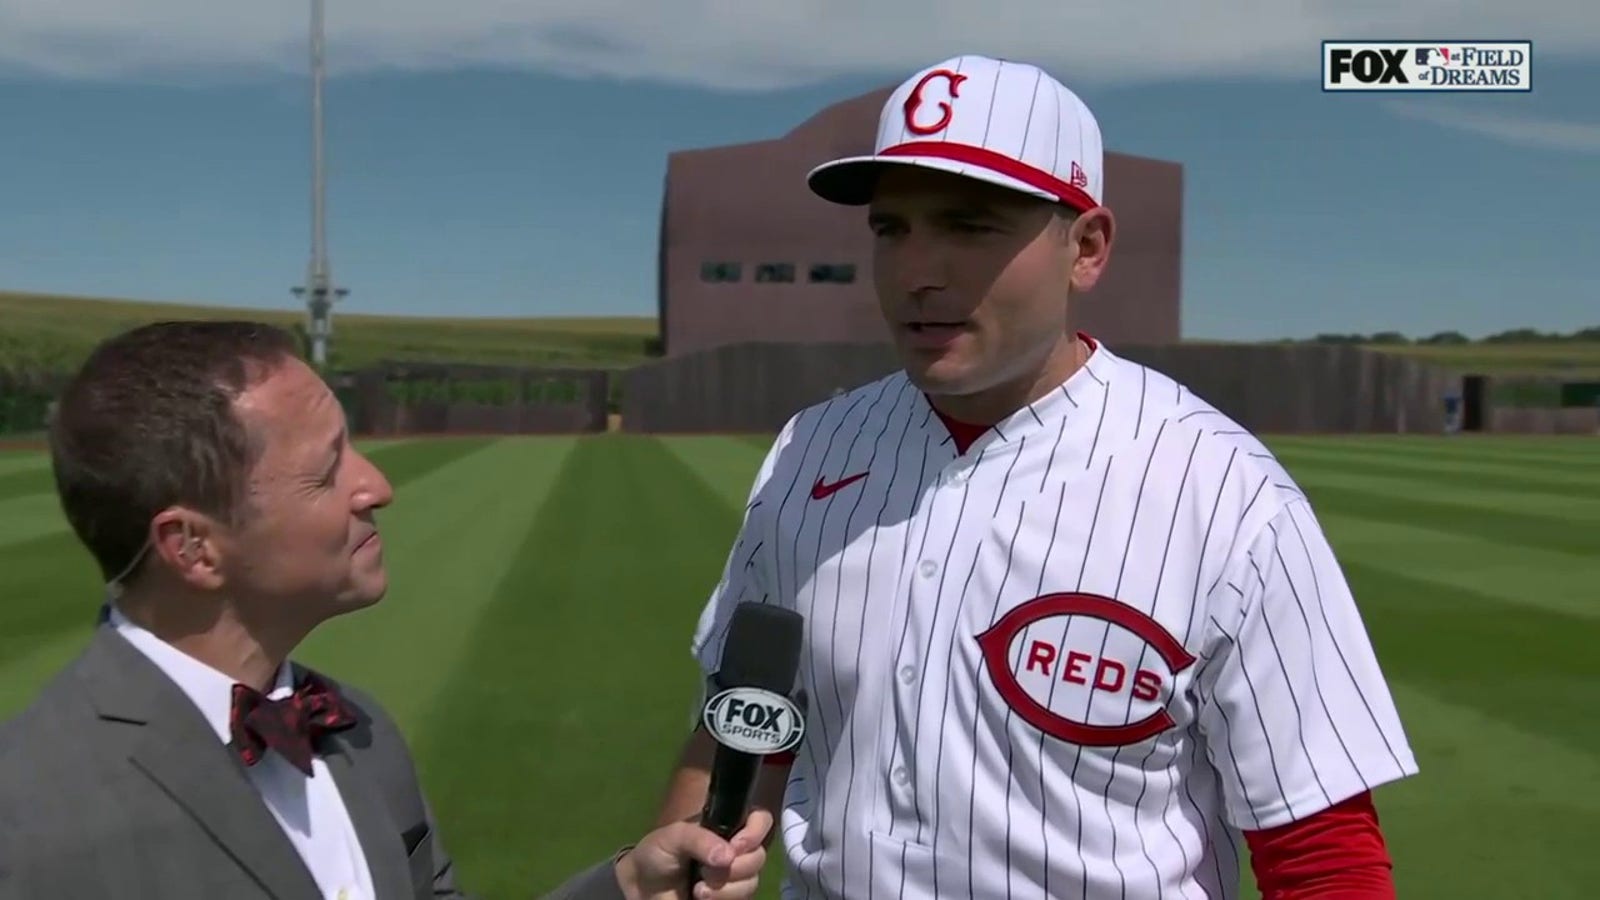 Joey Votto on watching 'Field of Dreams' with his late father